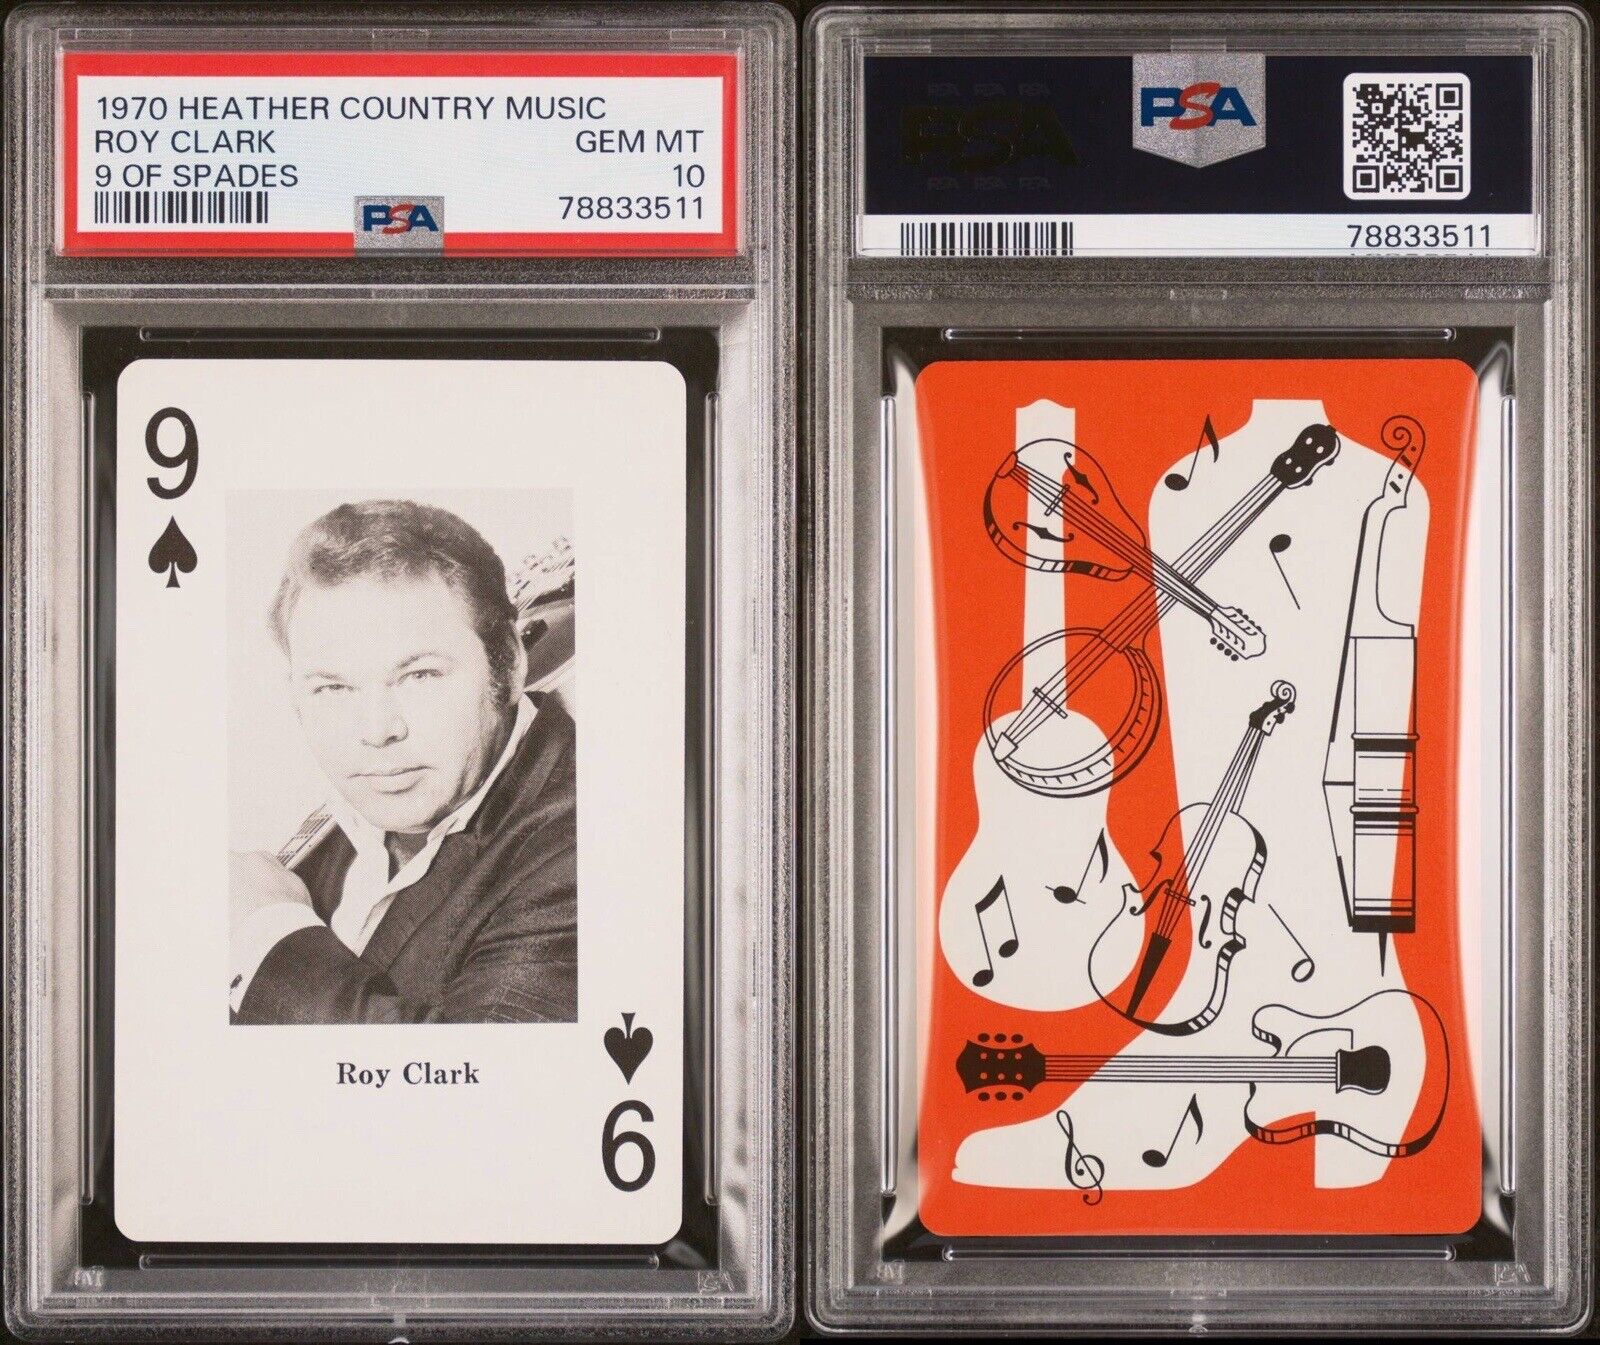 EXTREMELY RARE 1970 HEATHER COUNTRY MUSIC ROY CLARK 9 OF SPADES PSA 10 GEM MINT